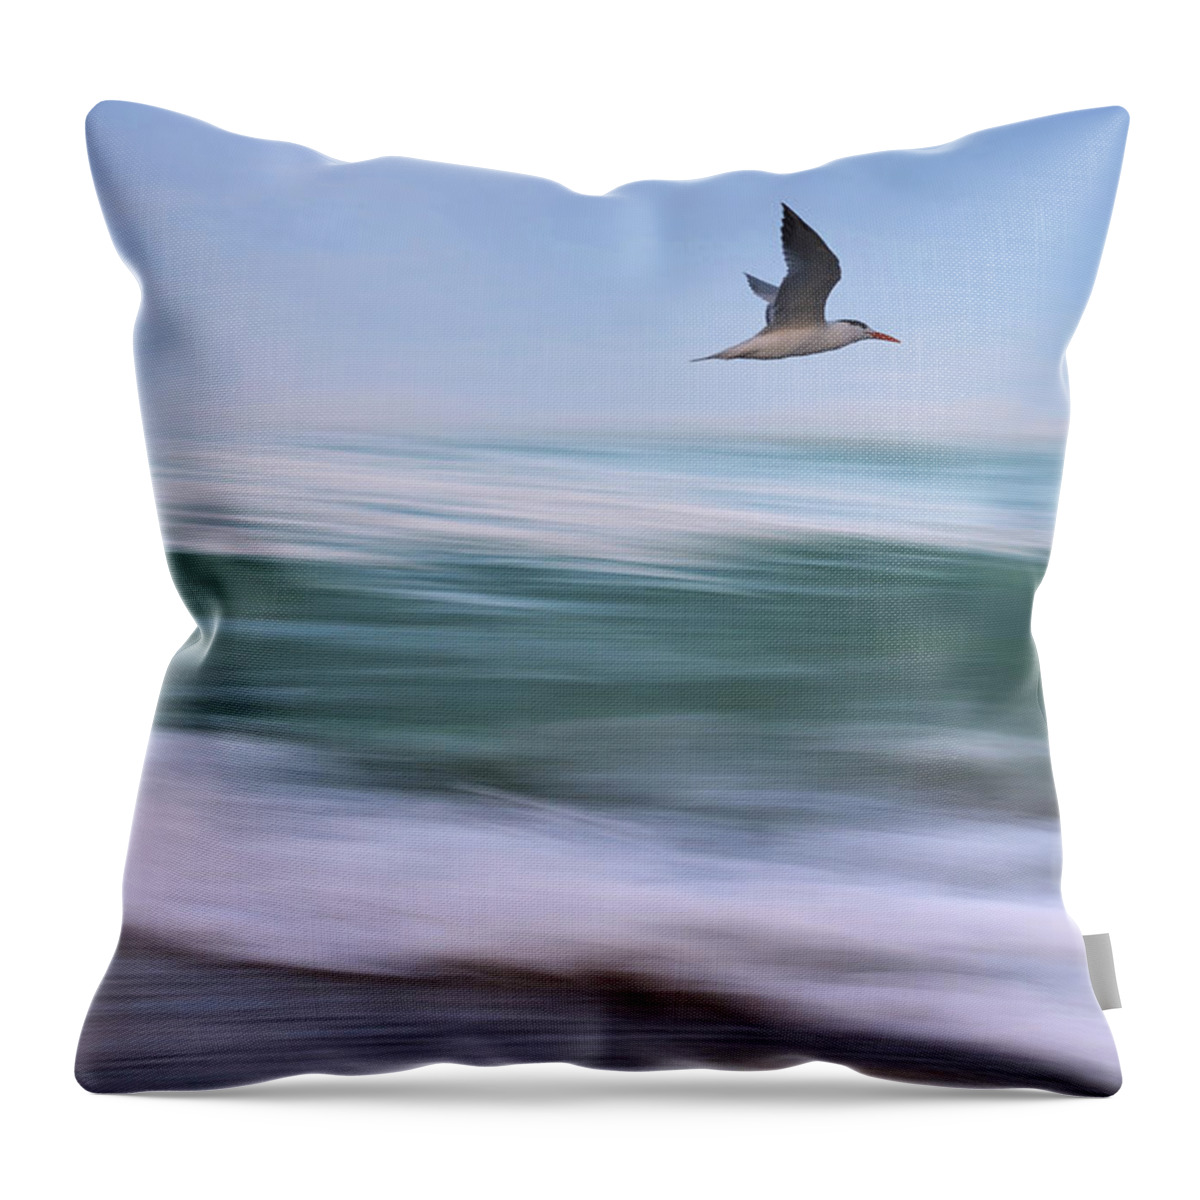 Ocean Throw Pillow featuring the photograph In Flight by Laura Fasulo